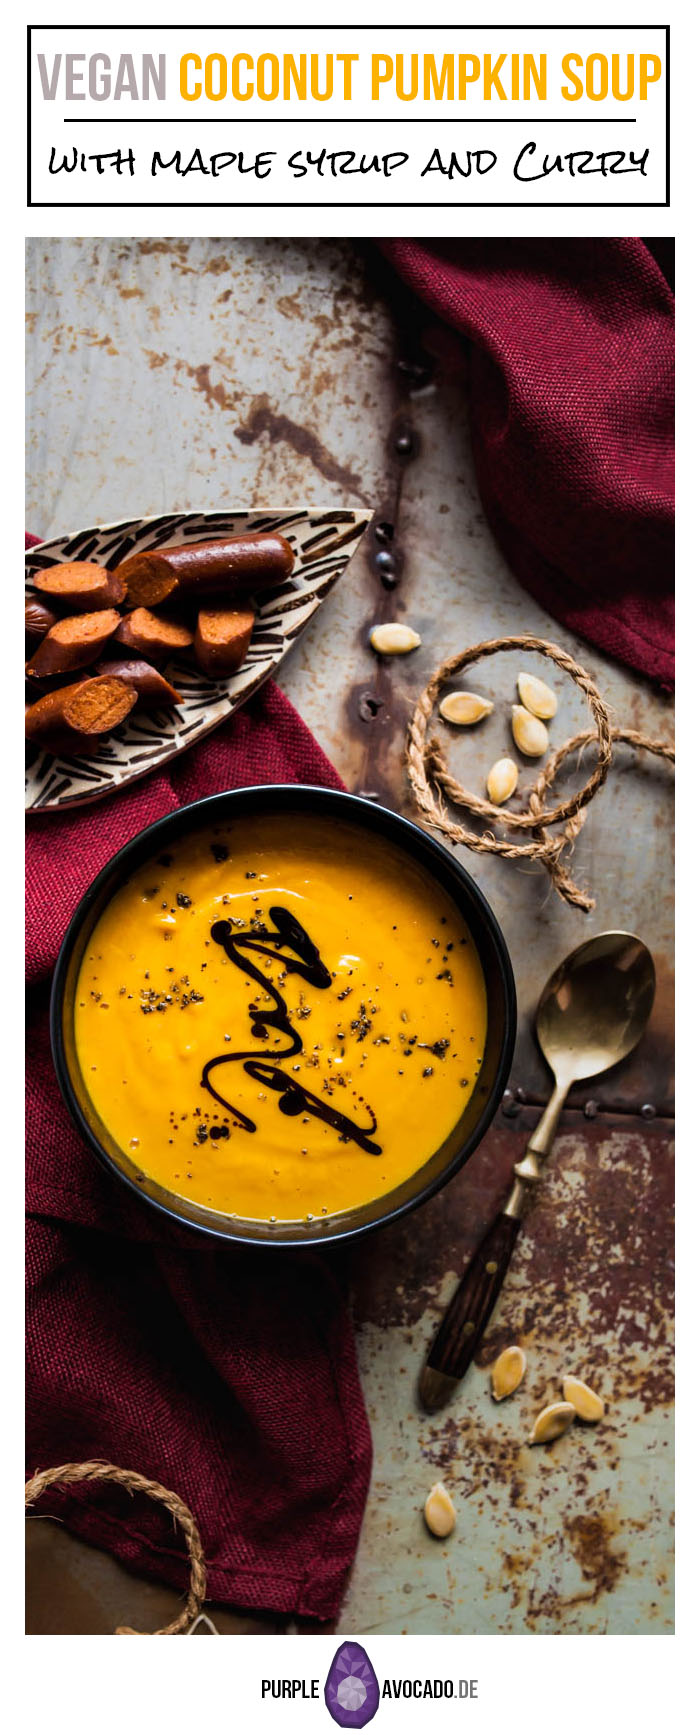 Vegan coconut pumpkin soup with maple syrup and curry. We're adding vegan merguez by Wheaty for the salty touch and bite.  #recipe #foodstyling #fall #autumn #recipes #pumpkin #hokkaido